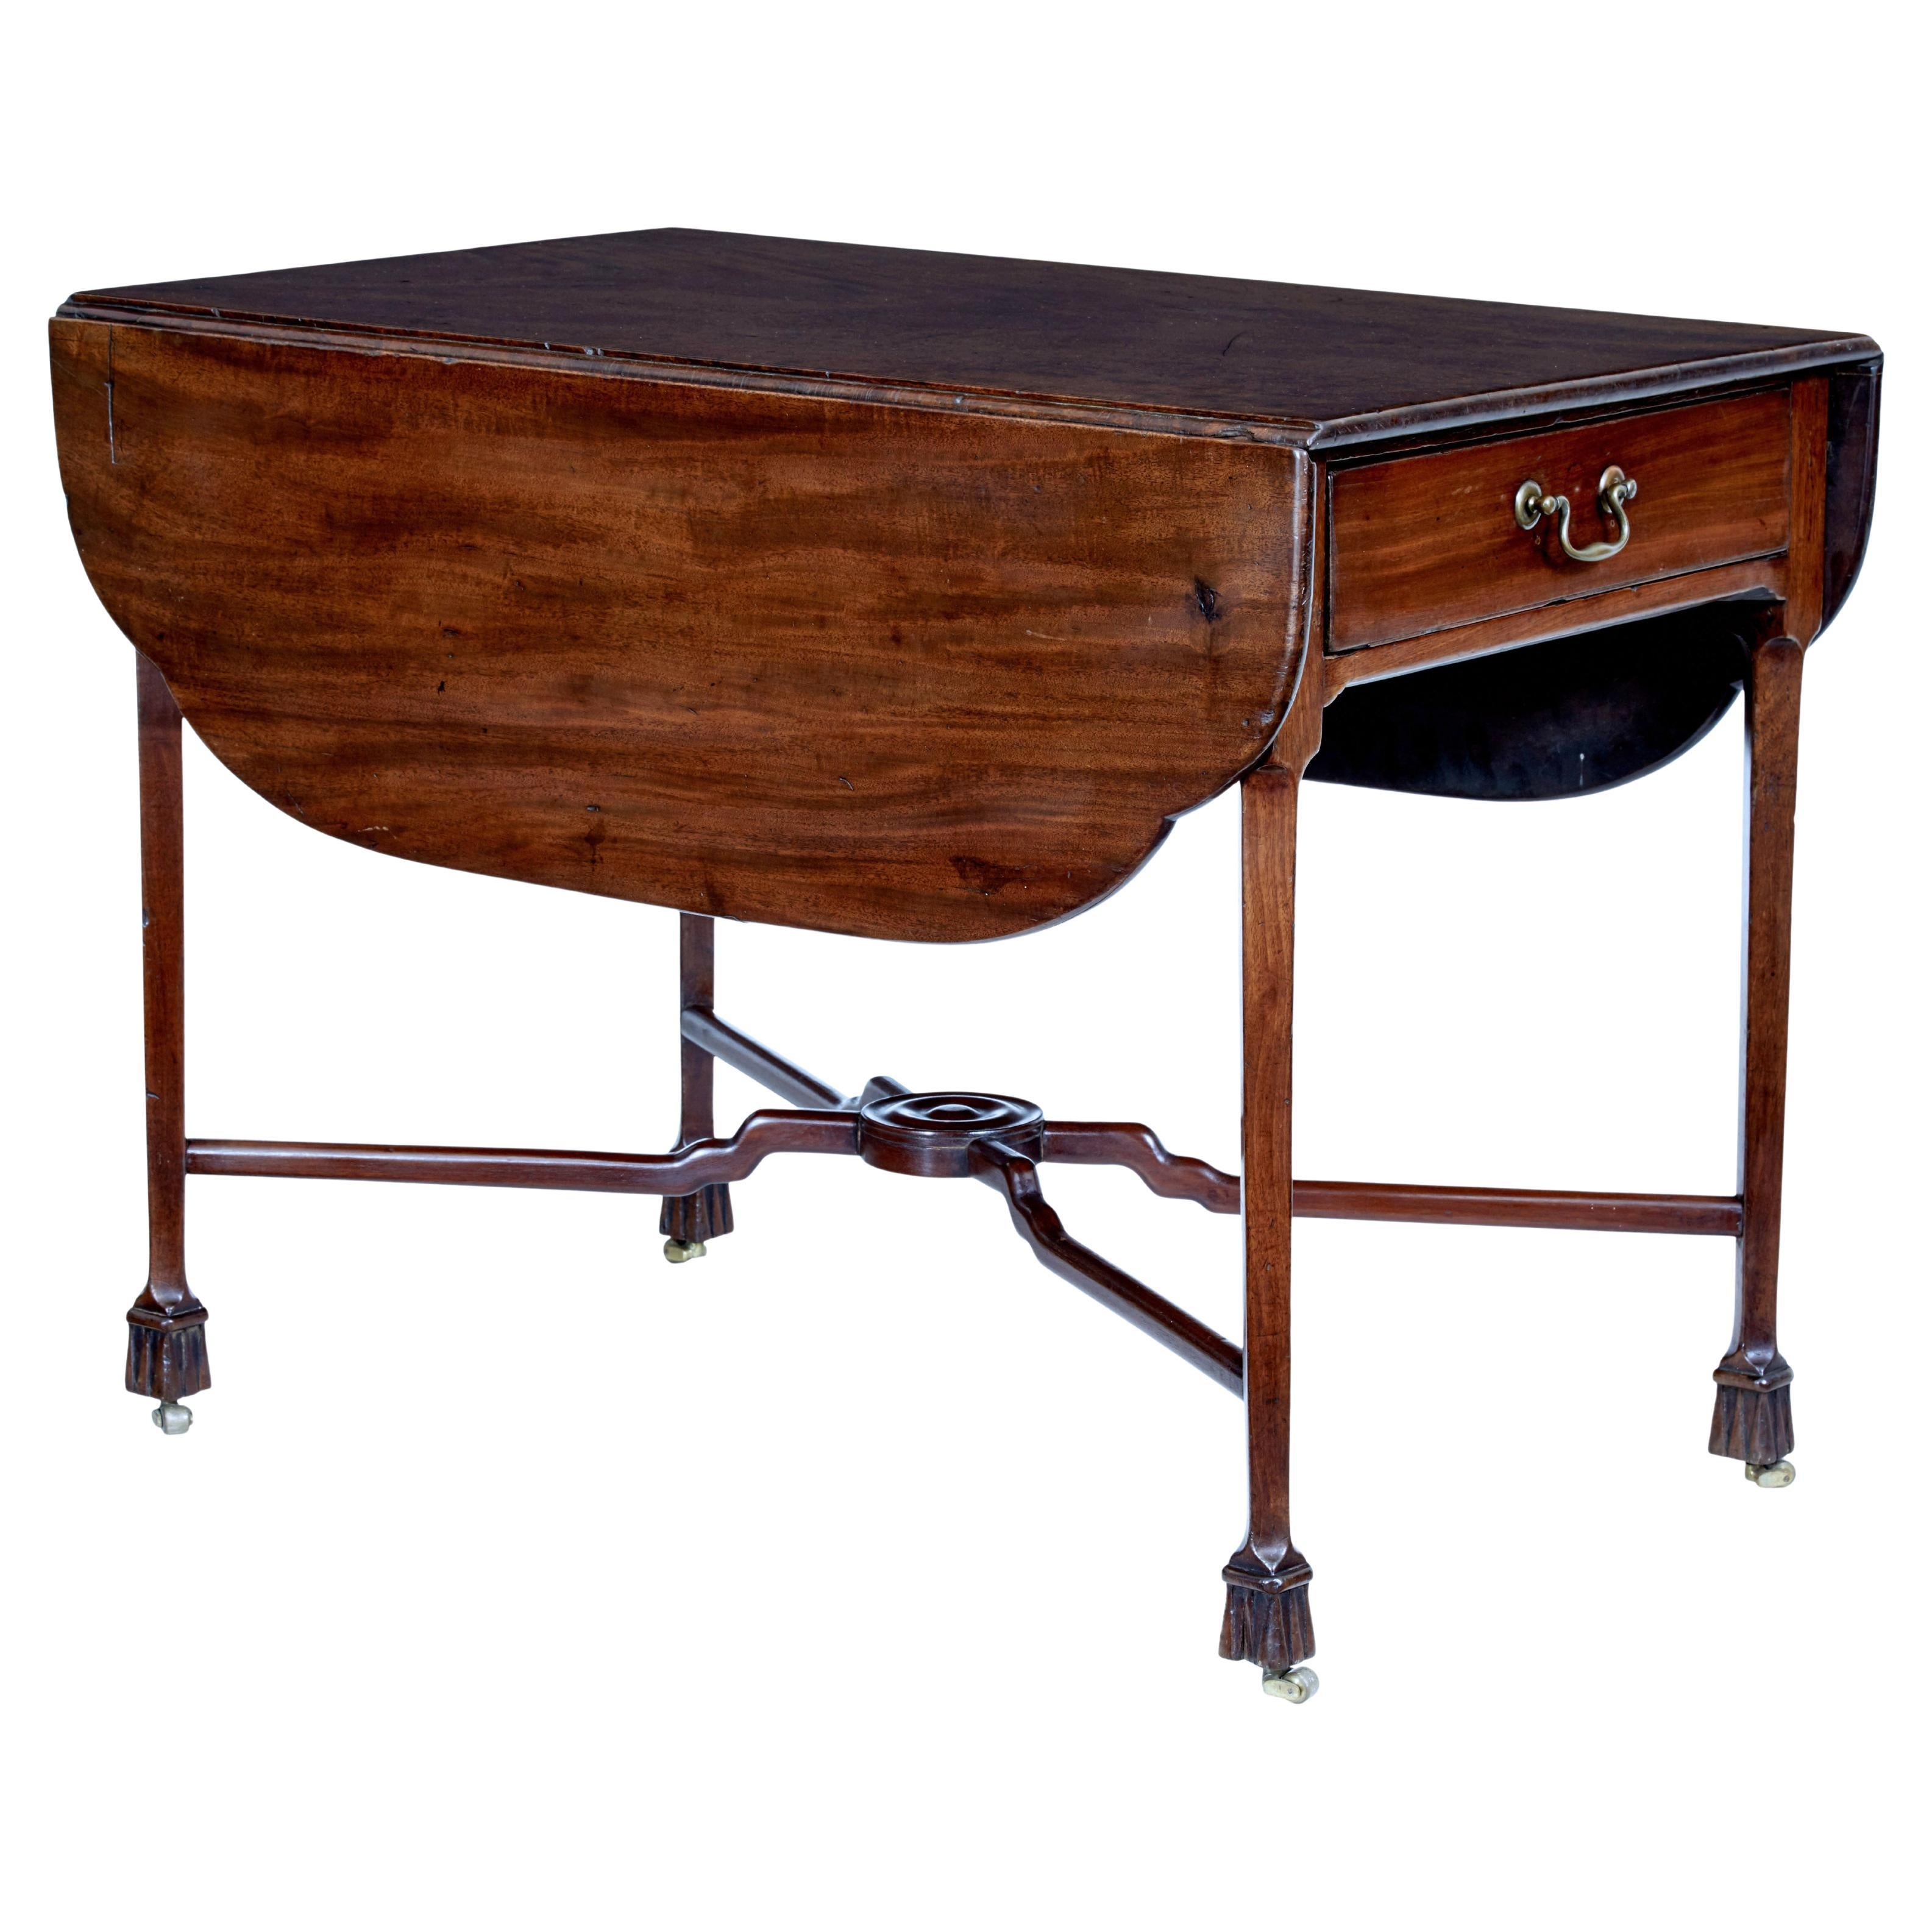 18th Century chippendale mahogany pembroke table For Sale